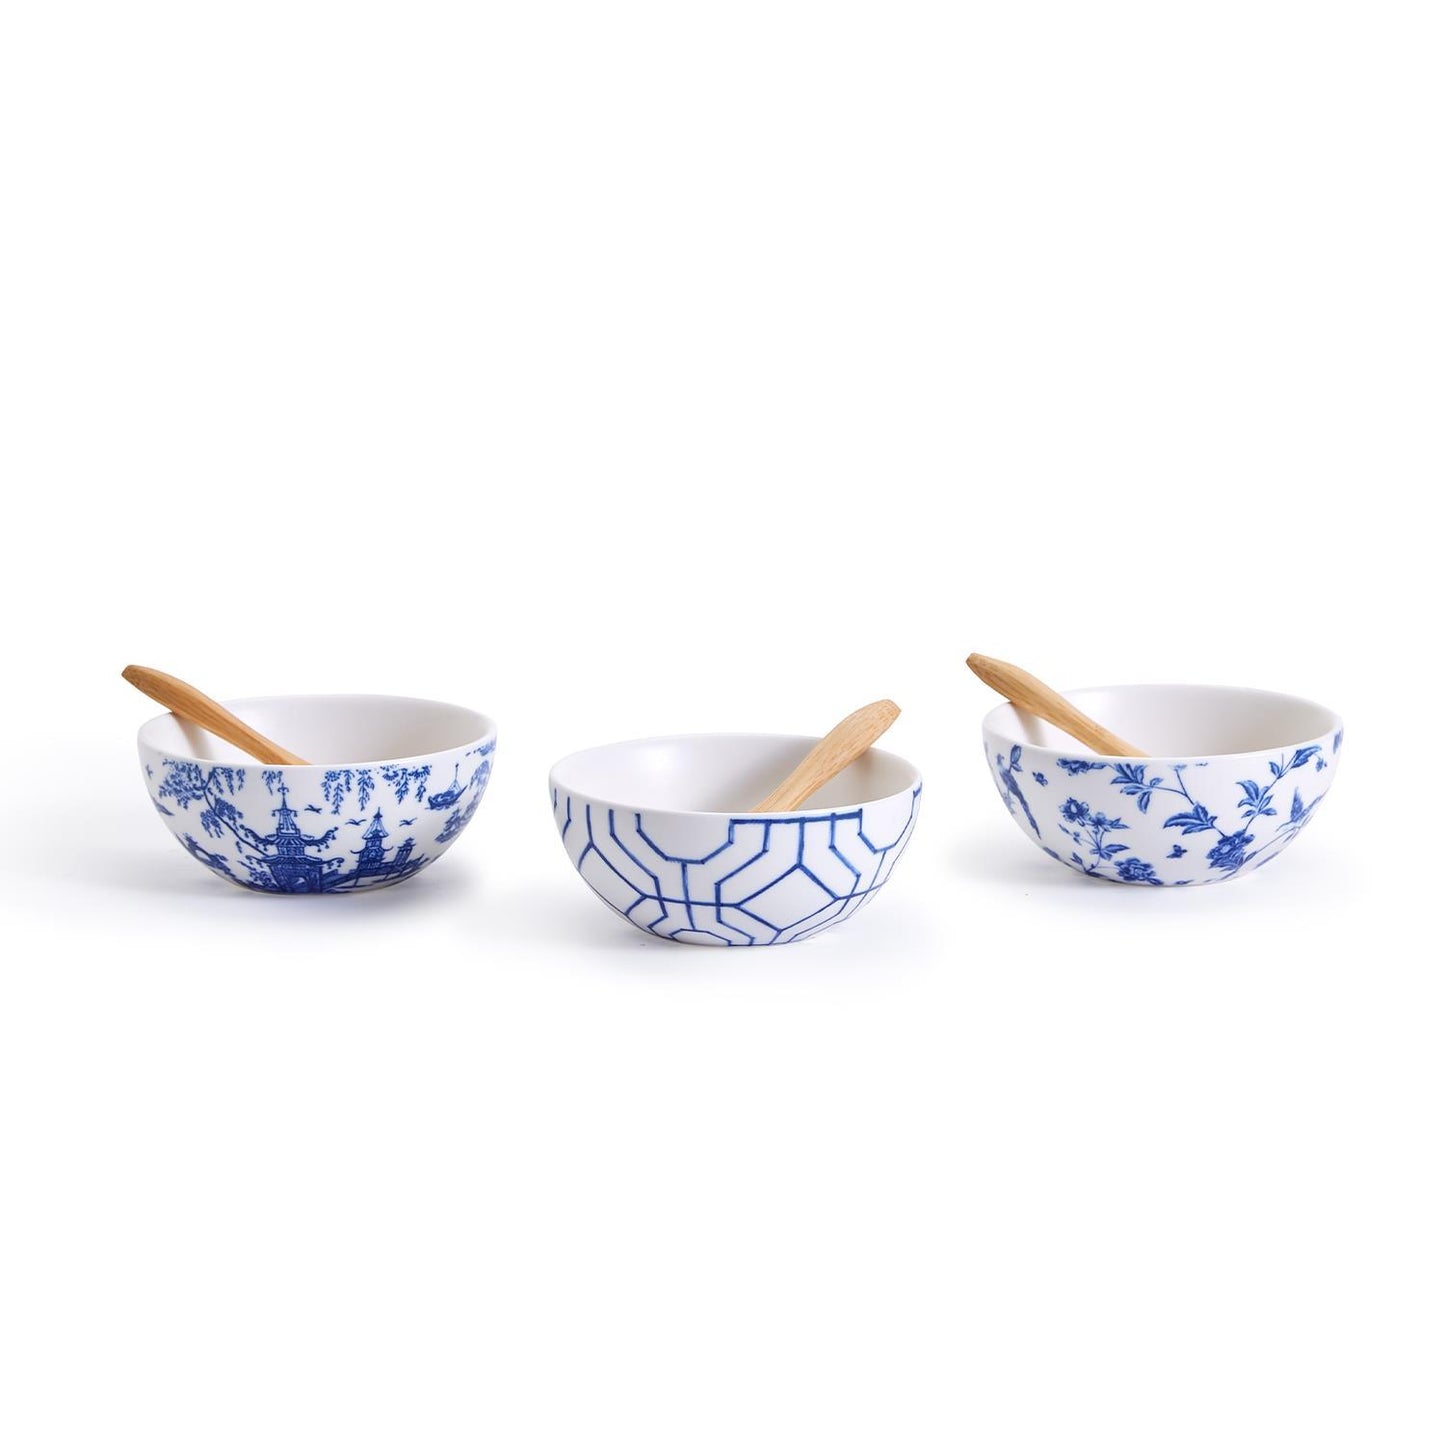 Two's Company Set of 3 Chinoiserie Tidbit & Tapas Bowls with Spoons w/ 3 Designs.